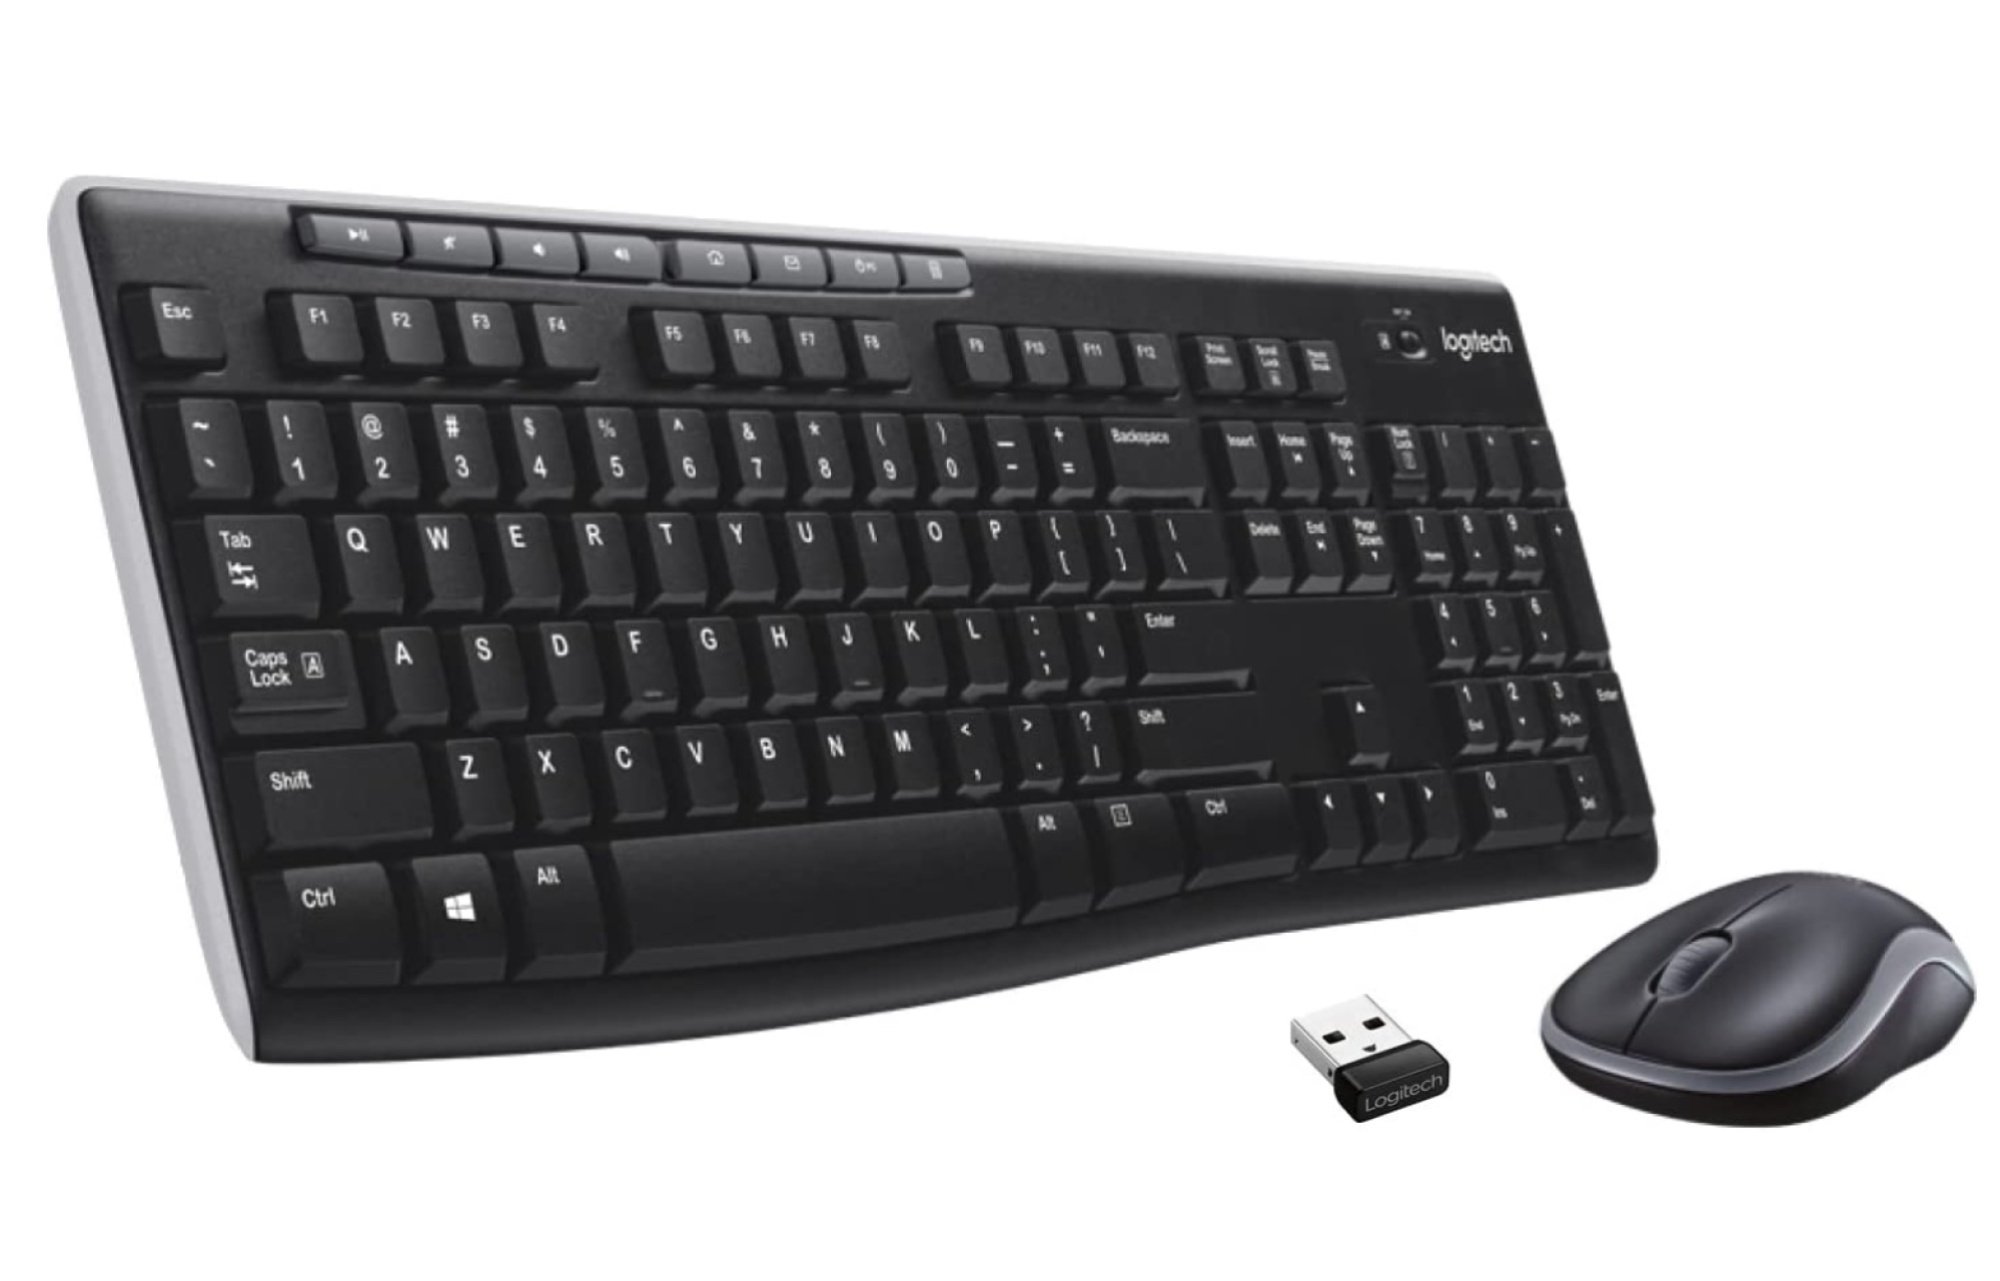 Logitech MK270 Wireless Keyboard And Mouse Combo on a white background.